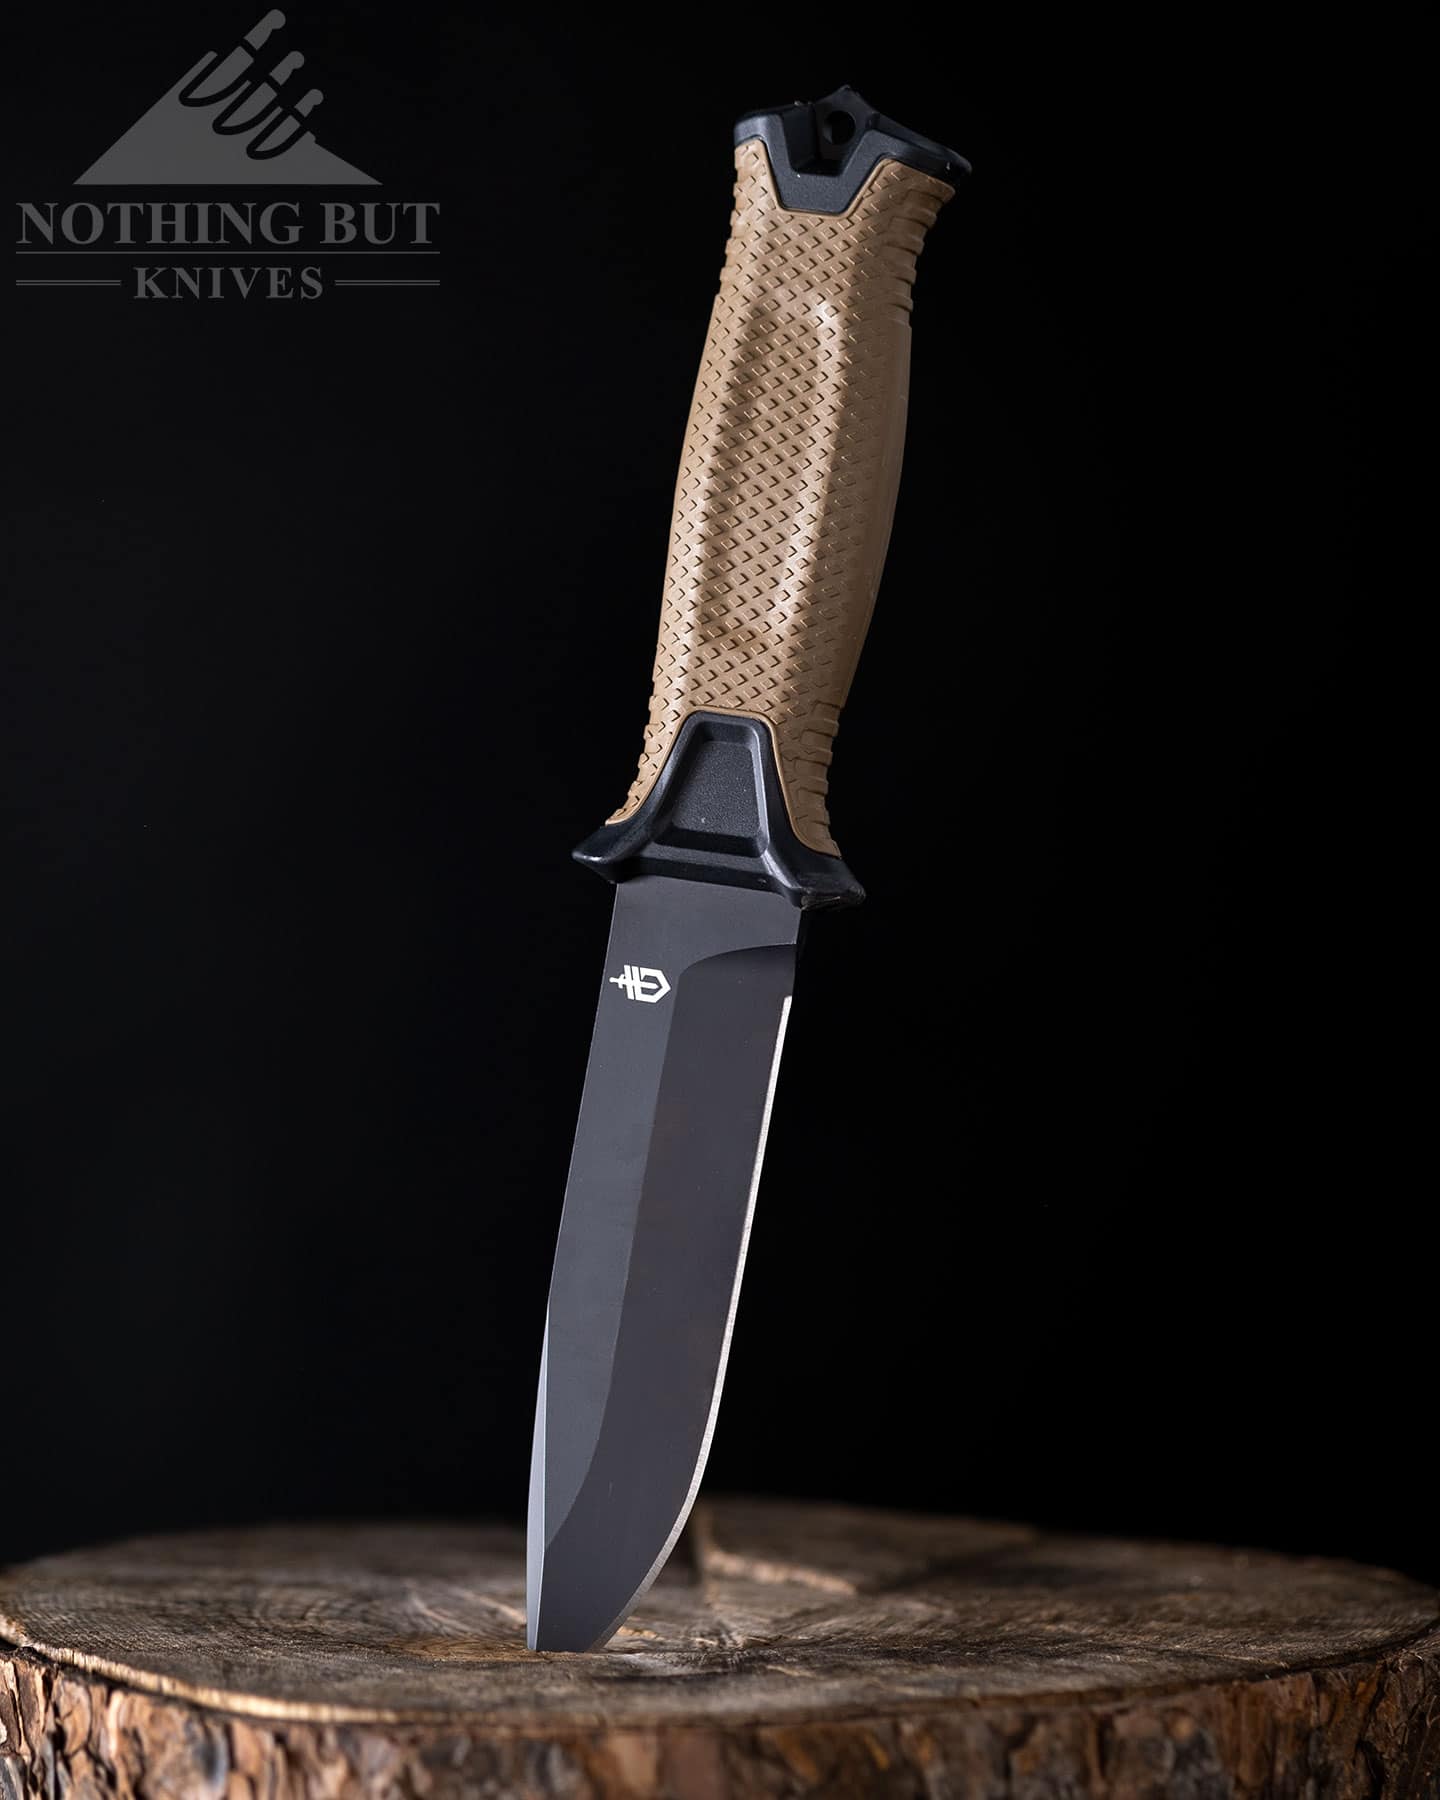 The Gerber Strongarm exemplifies their military aesthetic to the extreme, but the StrongArm has established itself as a capable tactical knife over the years.